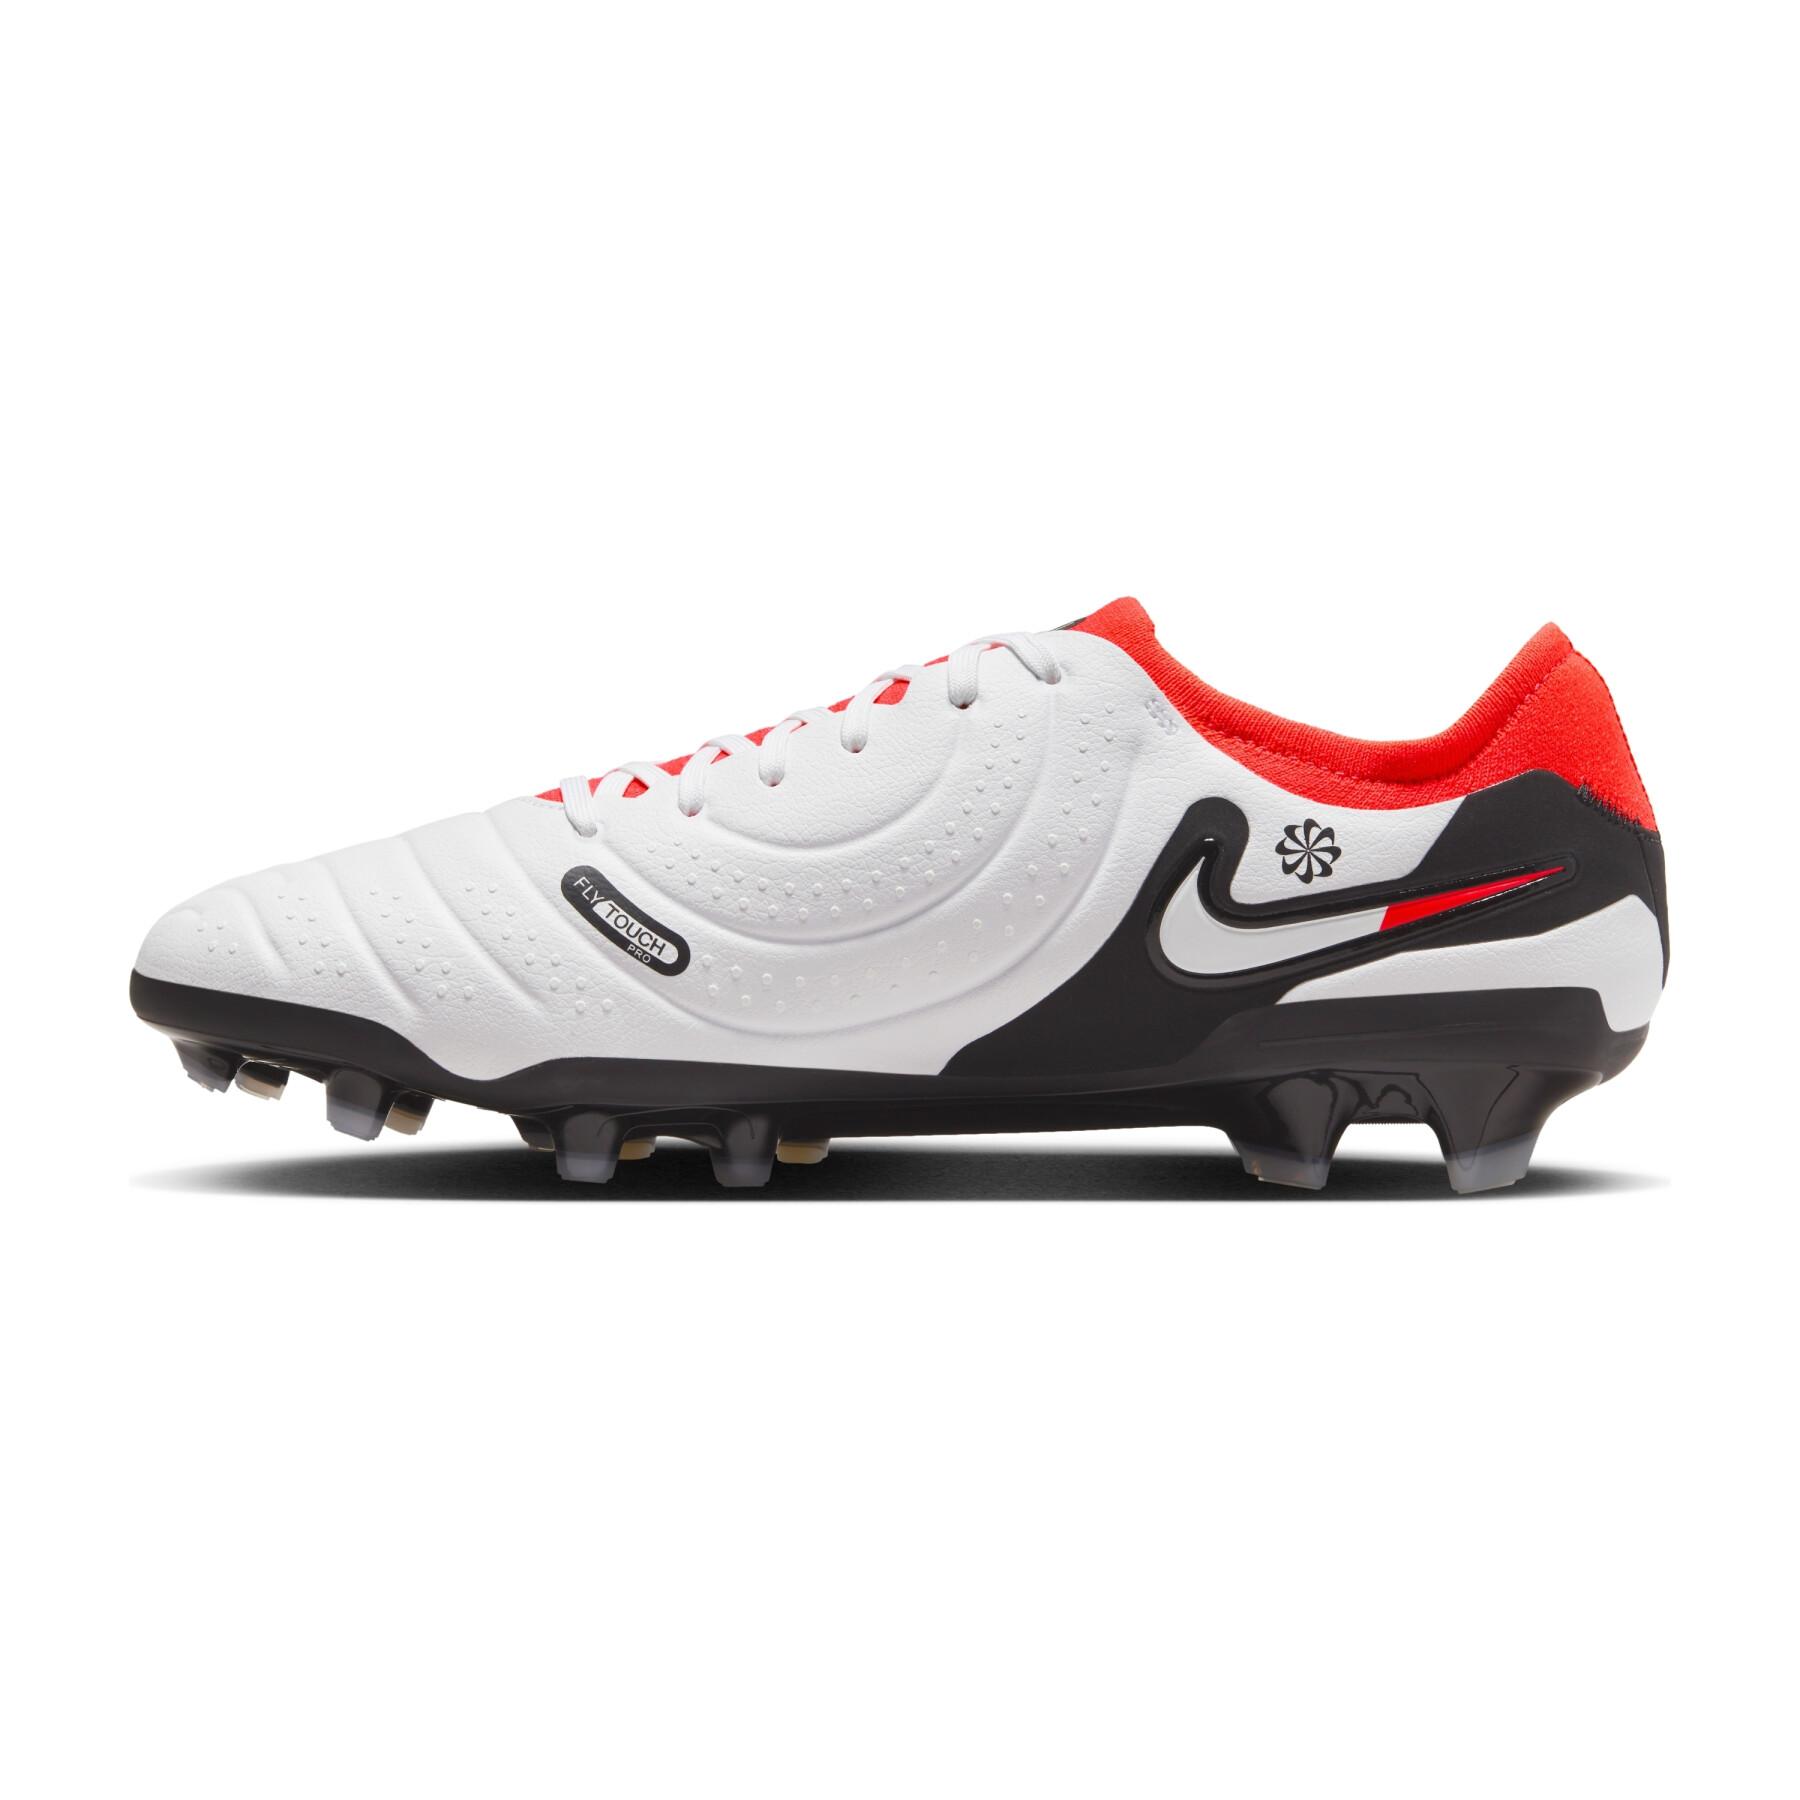 Soccer cleats Nike Tiempo Legend 10 Pro FG - Ready Pack